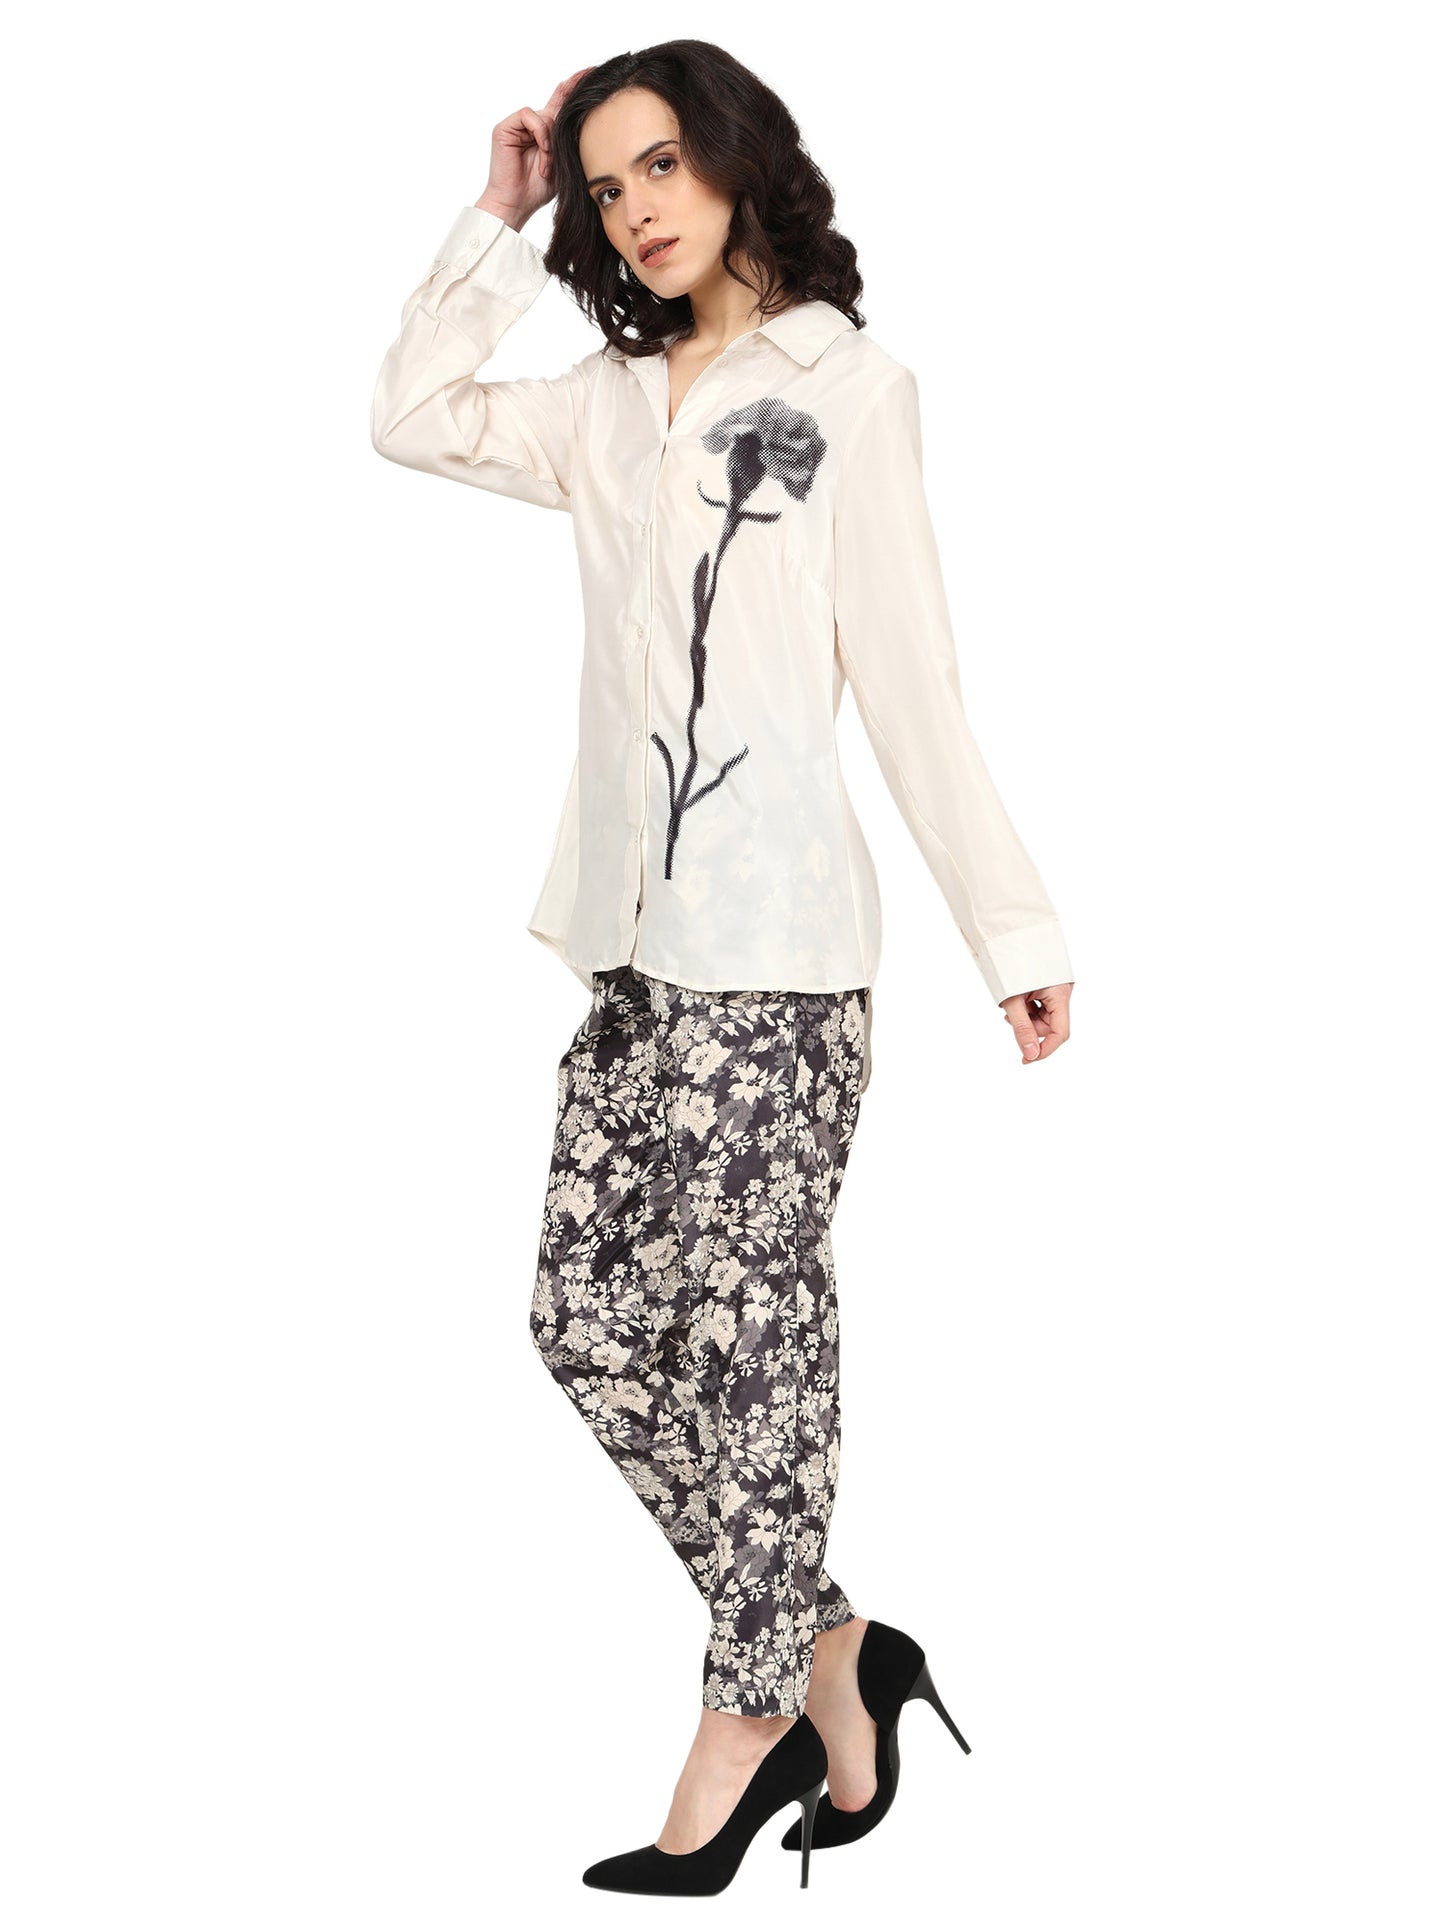 Yash Gallery Women's White Polyester Floral Placement Printed Co-Ord Set